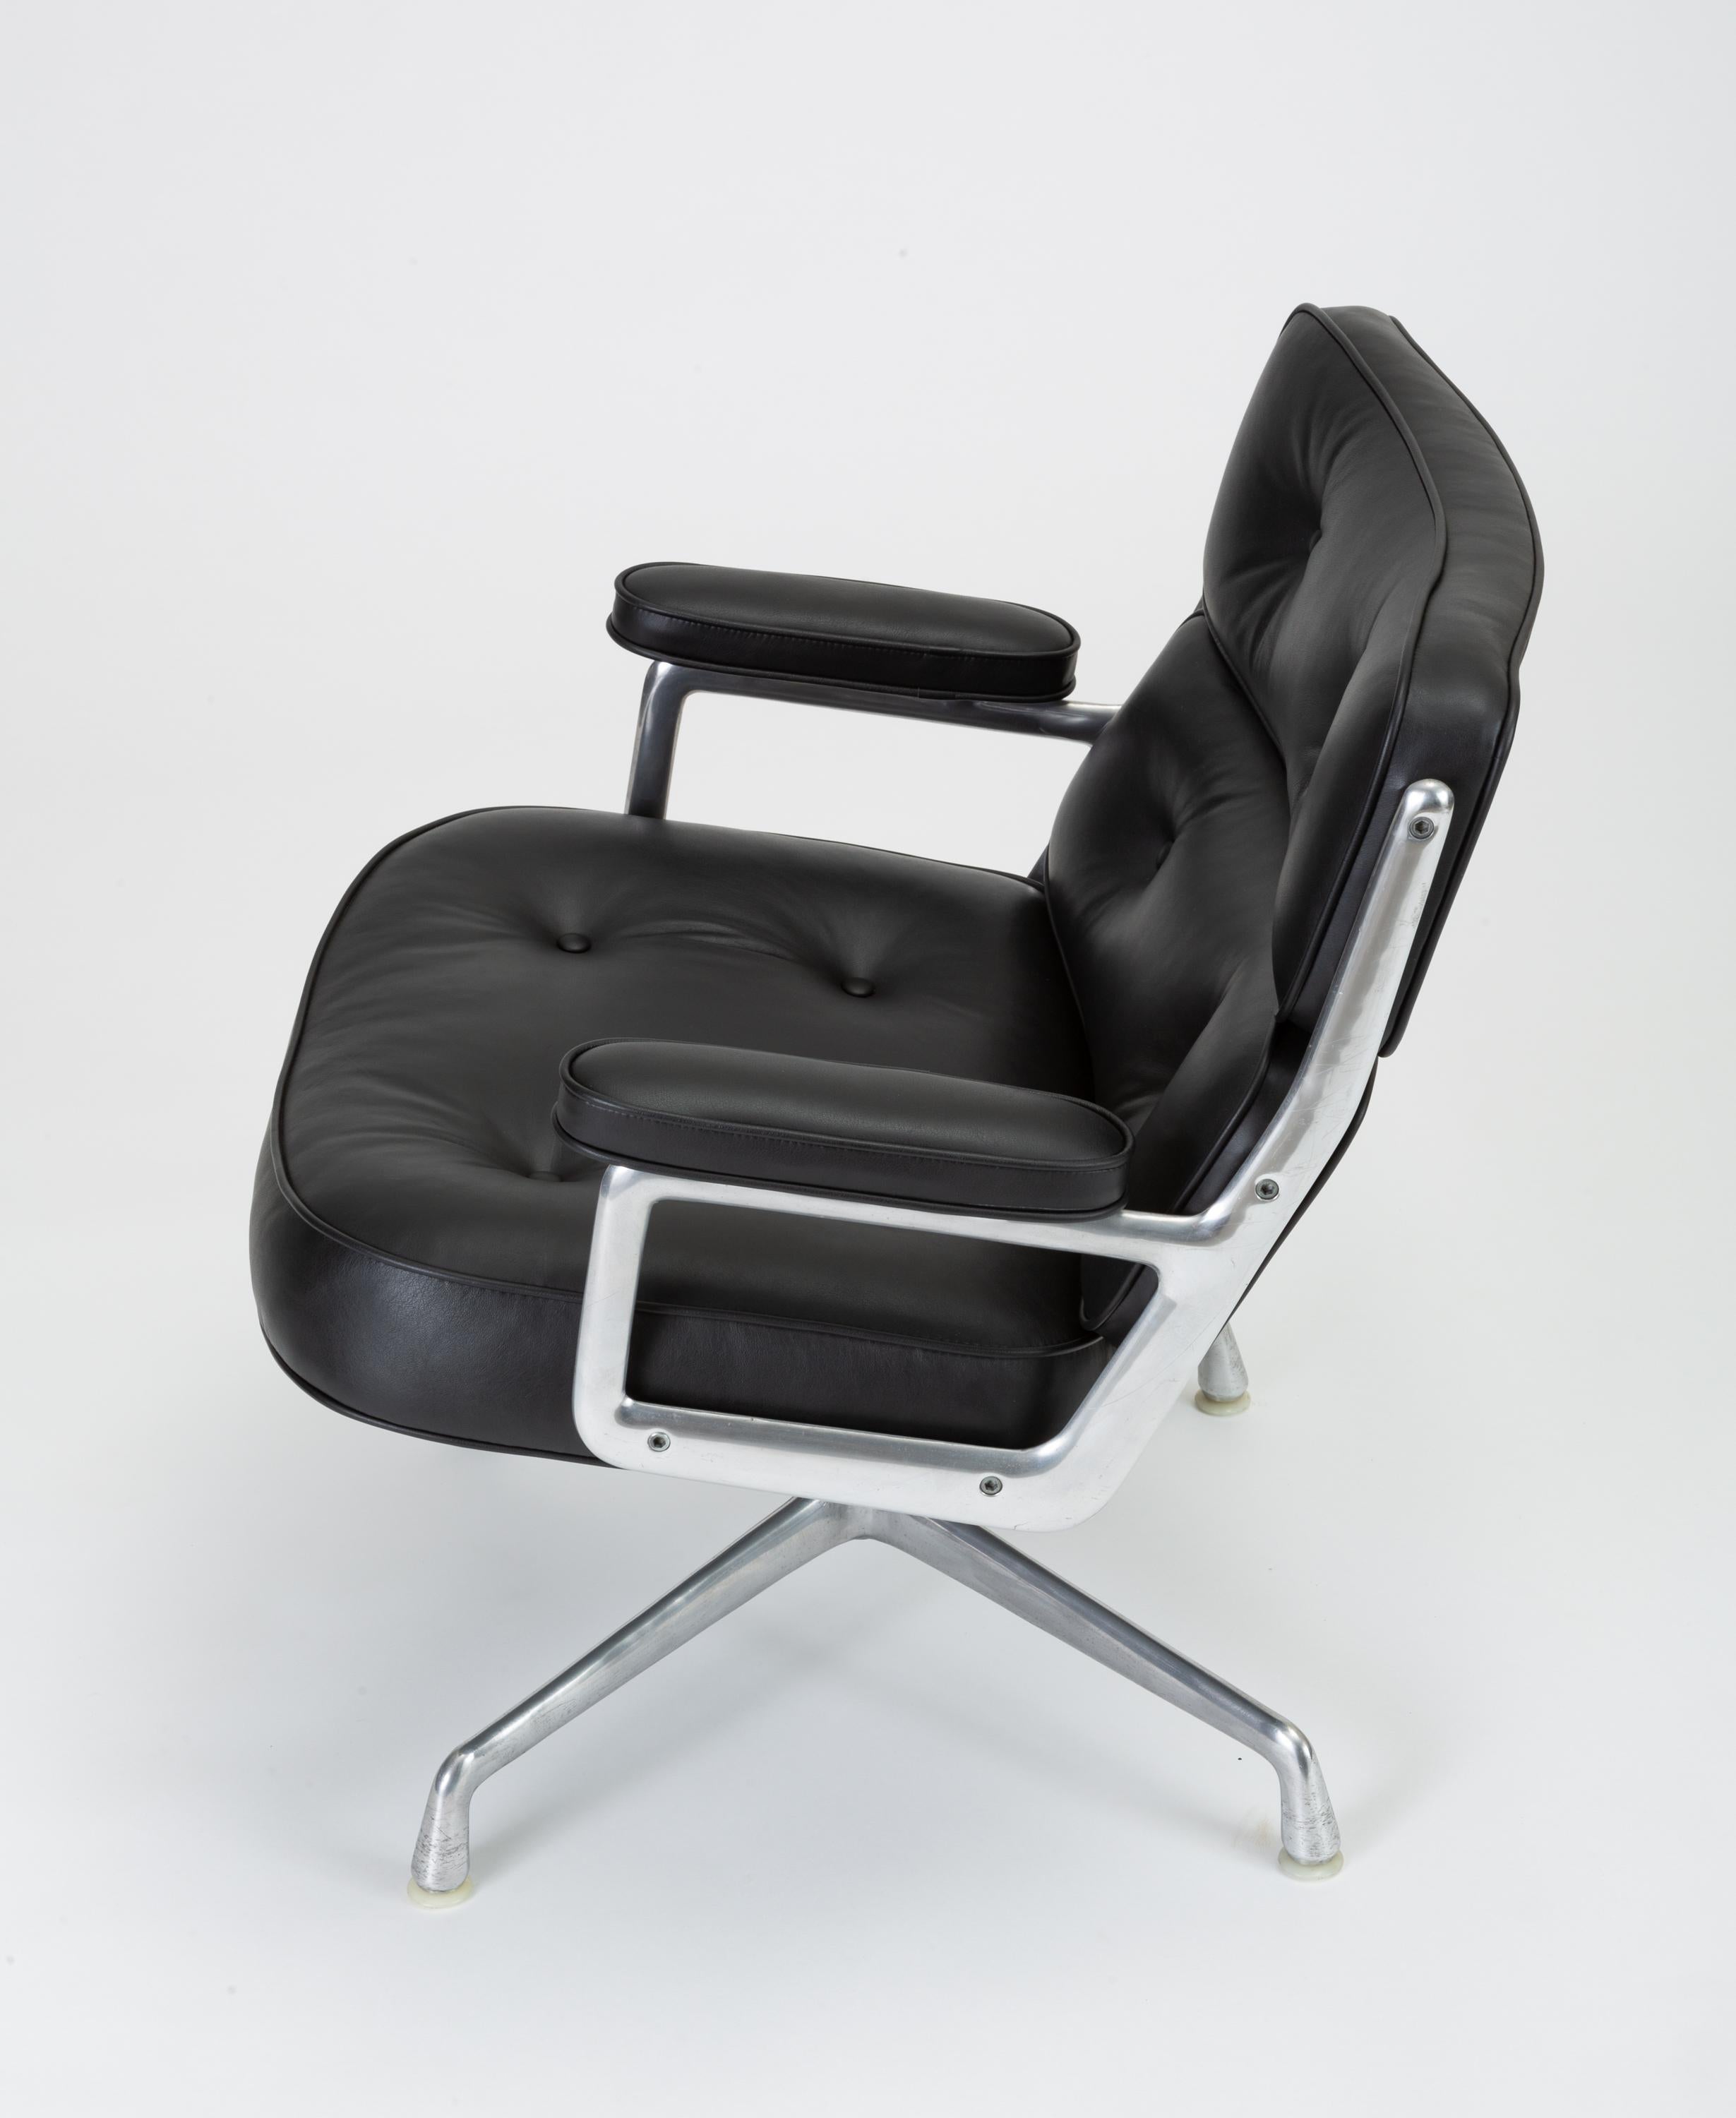 Time Life Lobby Chair by Ray and Charles Eames for Herman Miller (Mitte des 20. Jahrhunderts)